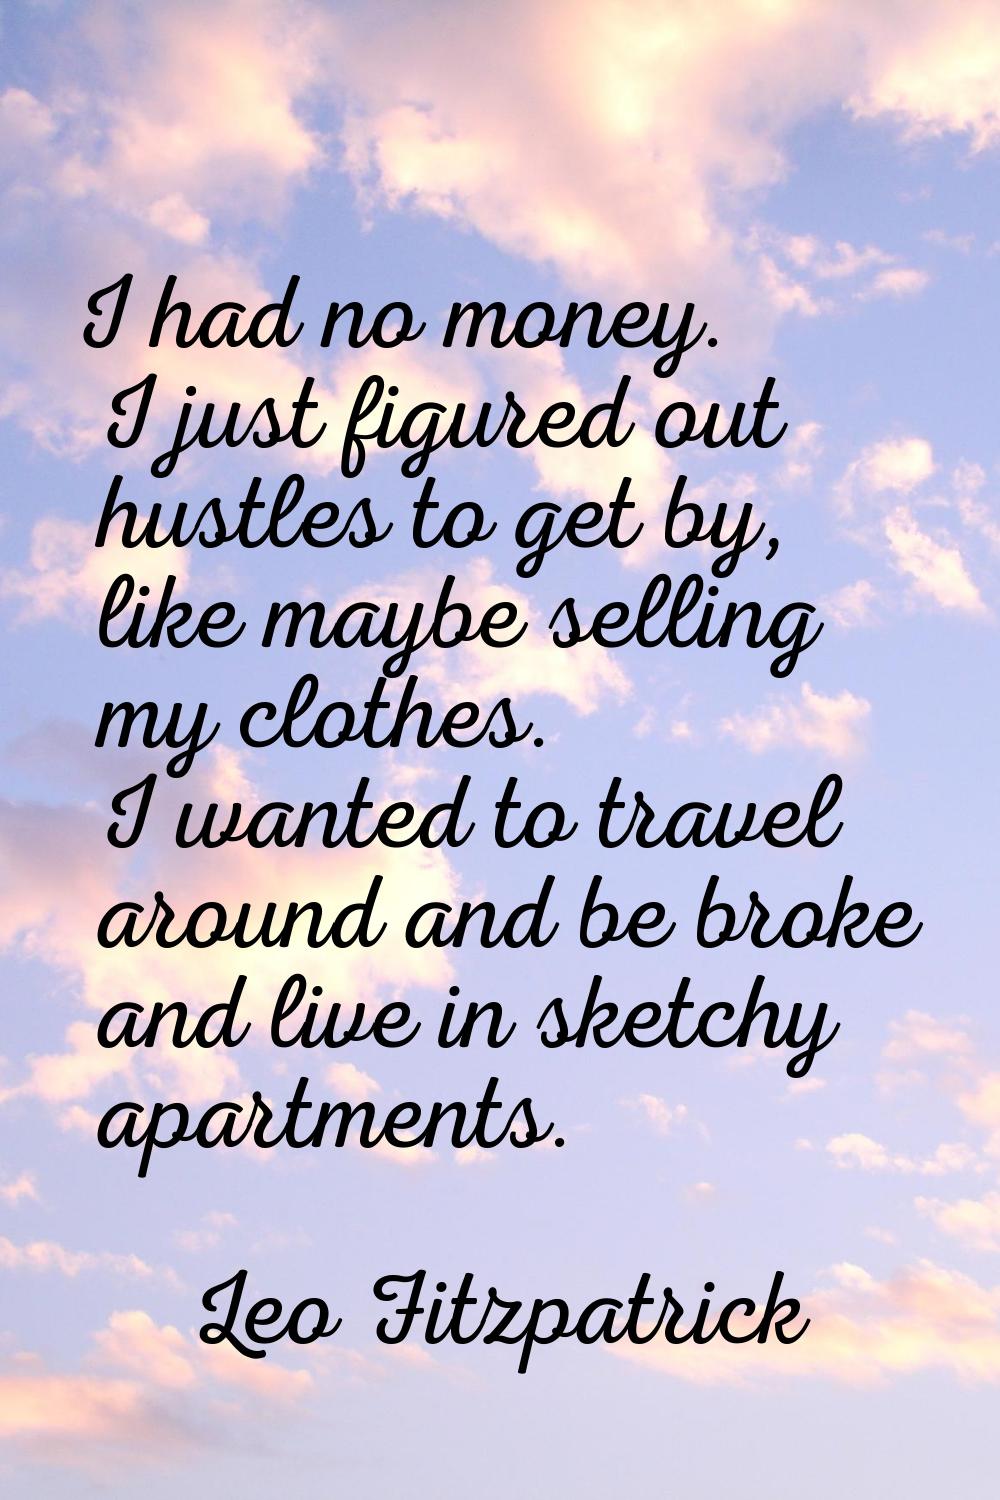 I had no money. I just figured out hustles to get by, like maybe selling my clothes. I wanted to tr